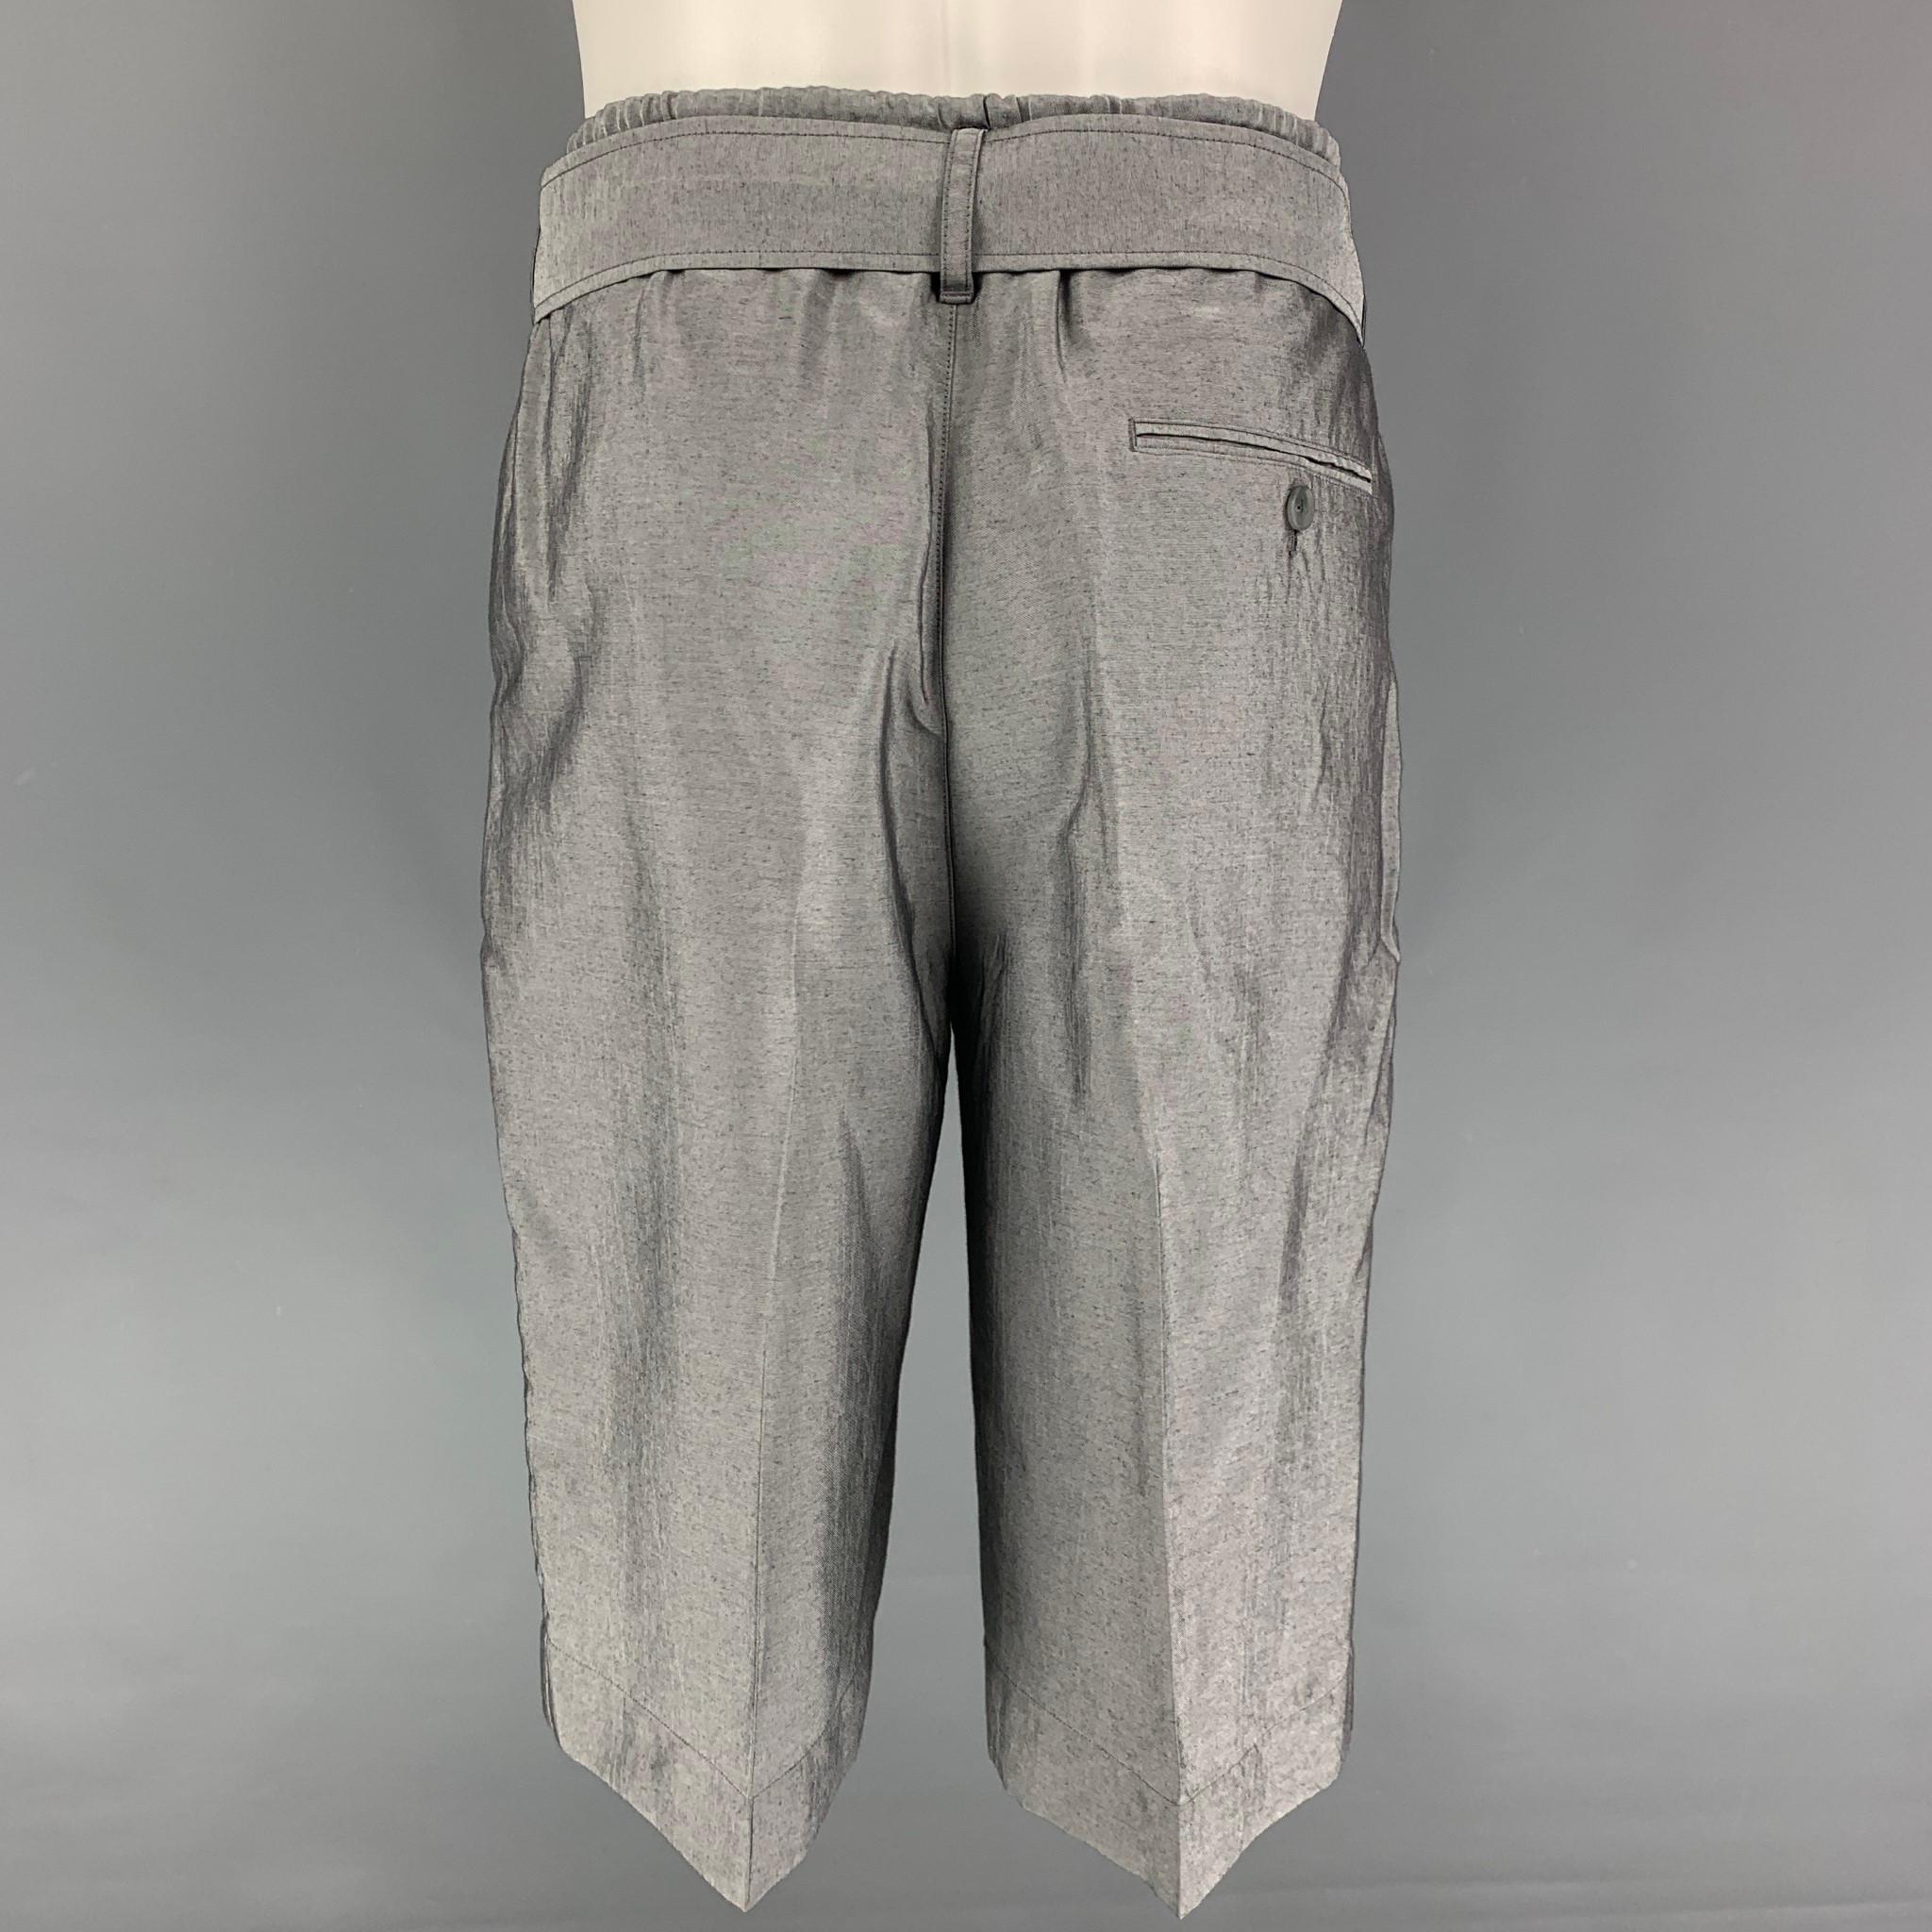 3.1 PHILLIP LIM shorts comes in a silver viscose blend featuring a elastic waistband, belted, and drawstring. 

Very Good Pre-Owned Condition.
Marked: 31

Measurements:

Waist: 31 in.
Rise: 13 in.
Inseam: 12.5 in. 